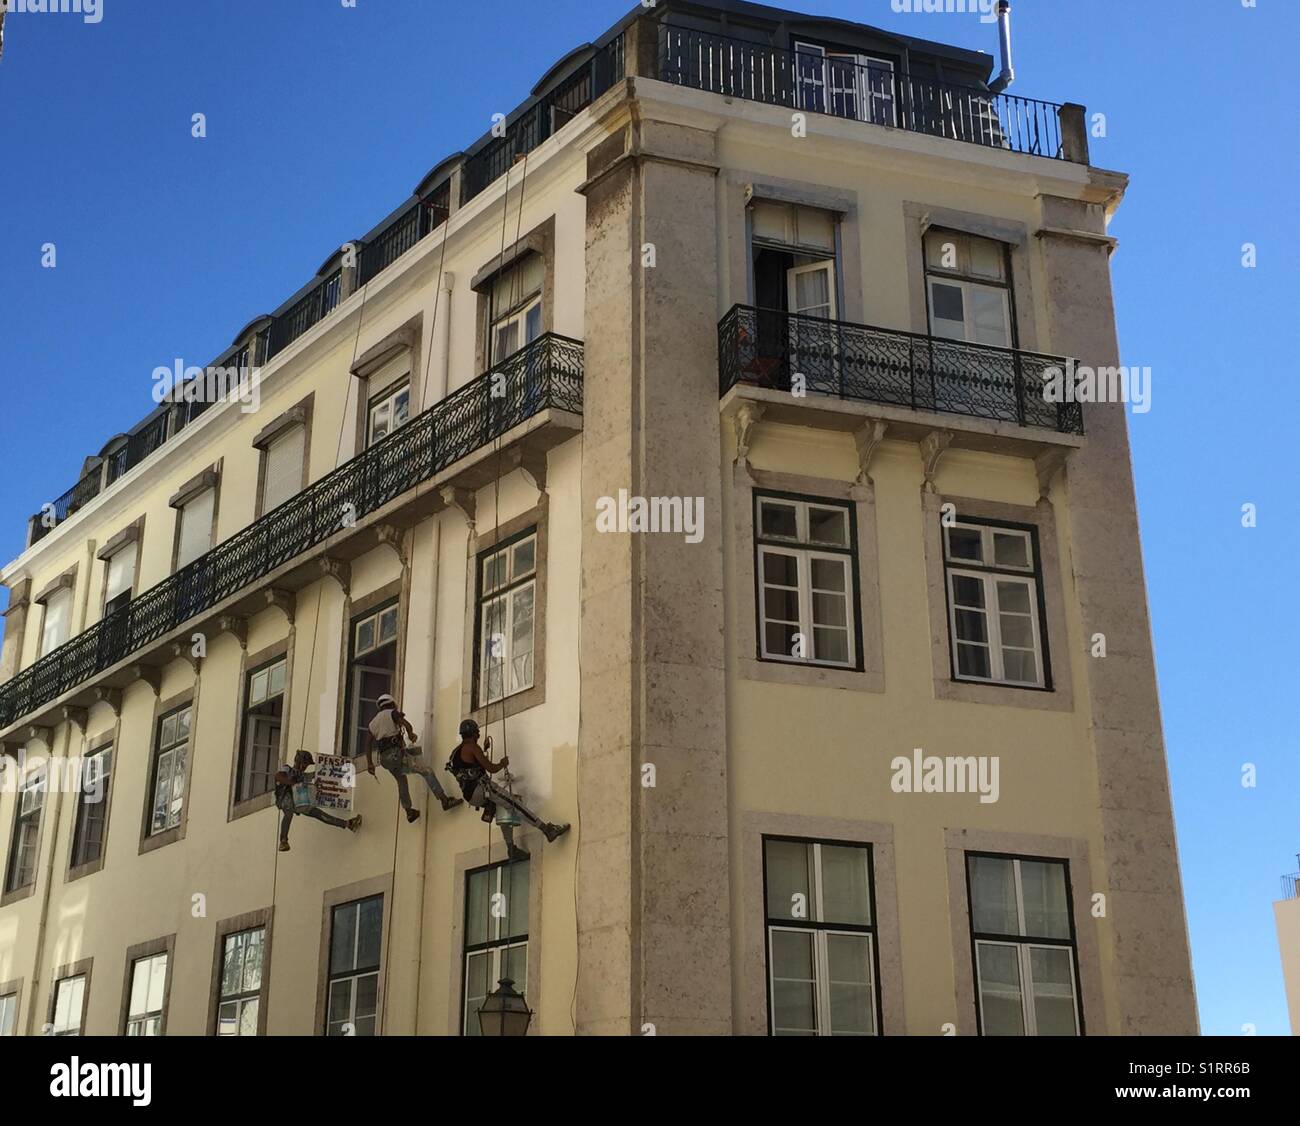 Three men painting side of building Stock Photo